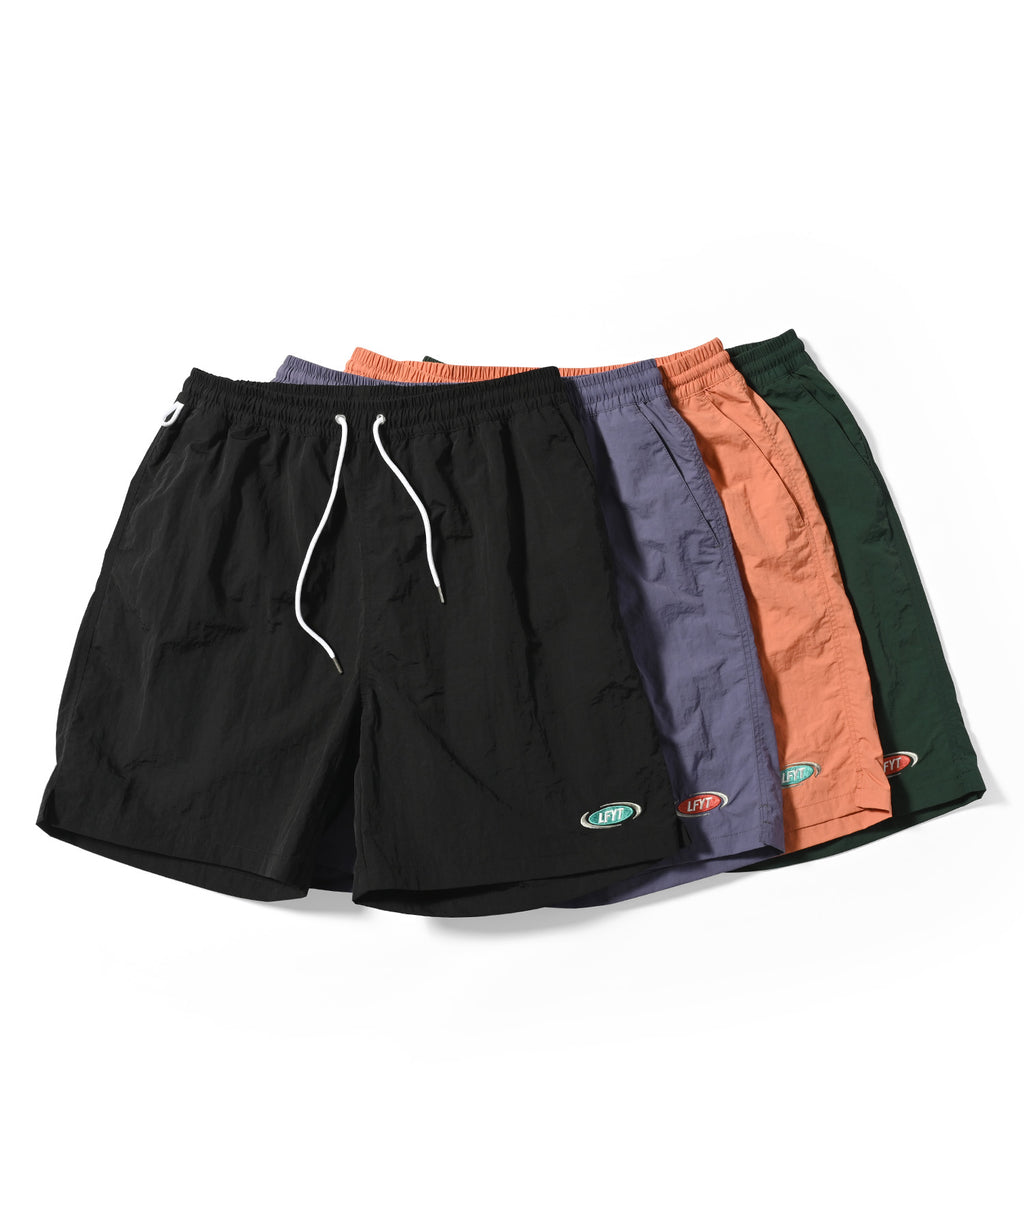 Online shopping for SHORTS | LFYT OFFICIAL SITE